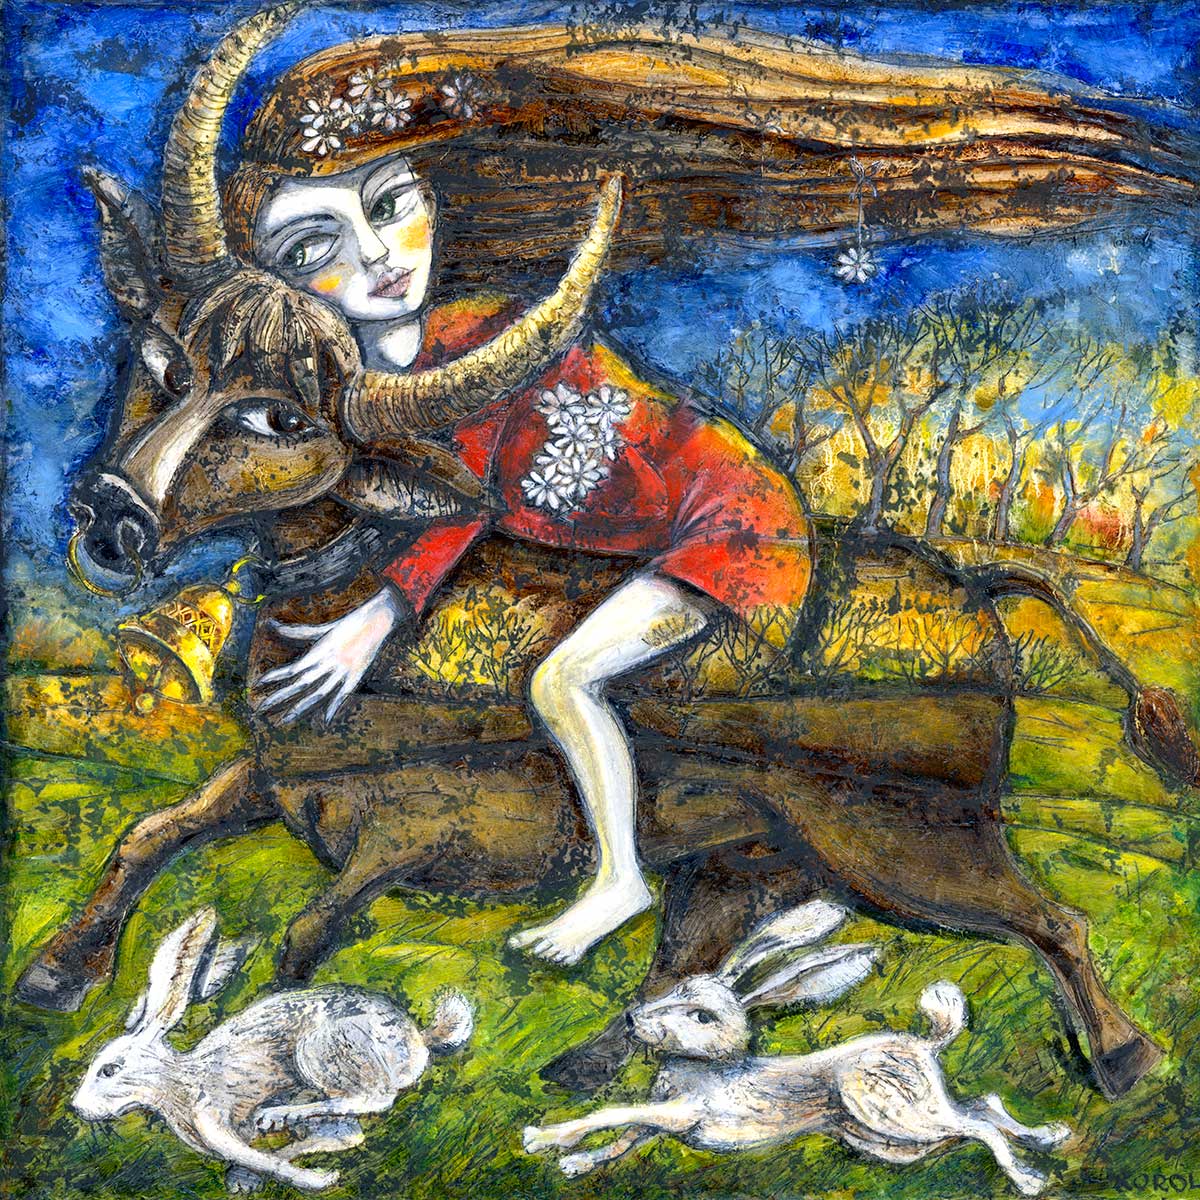 Girl riding a bull with white rabbits running beside in blue, yellow, green and gold